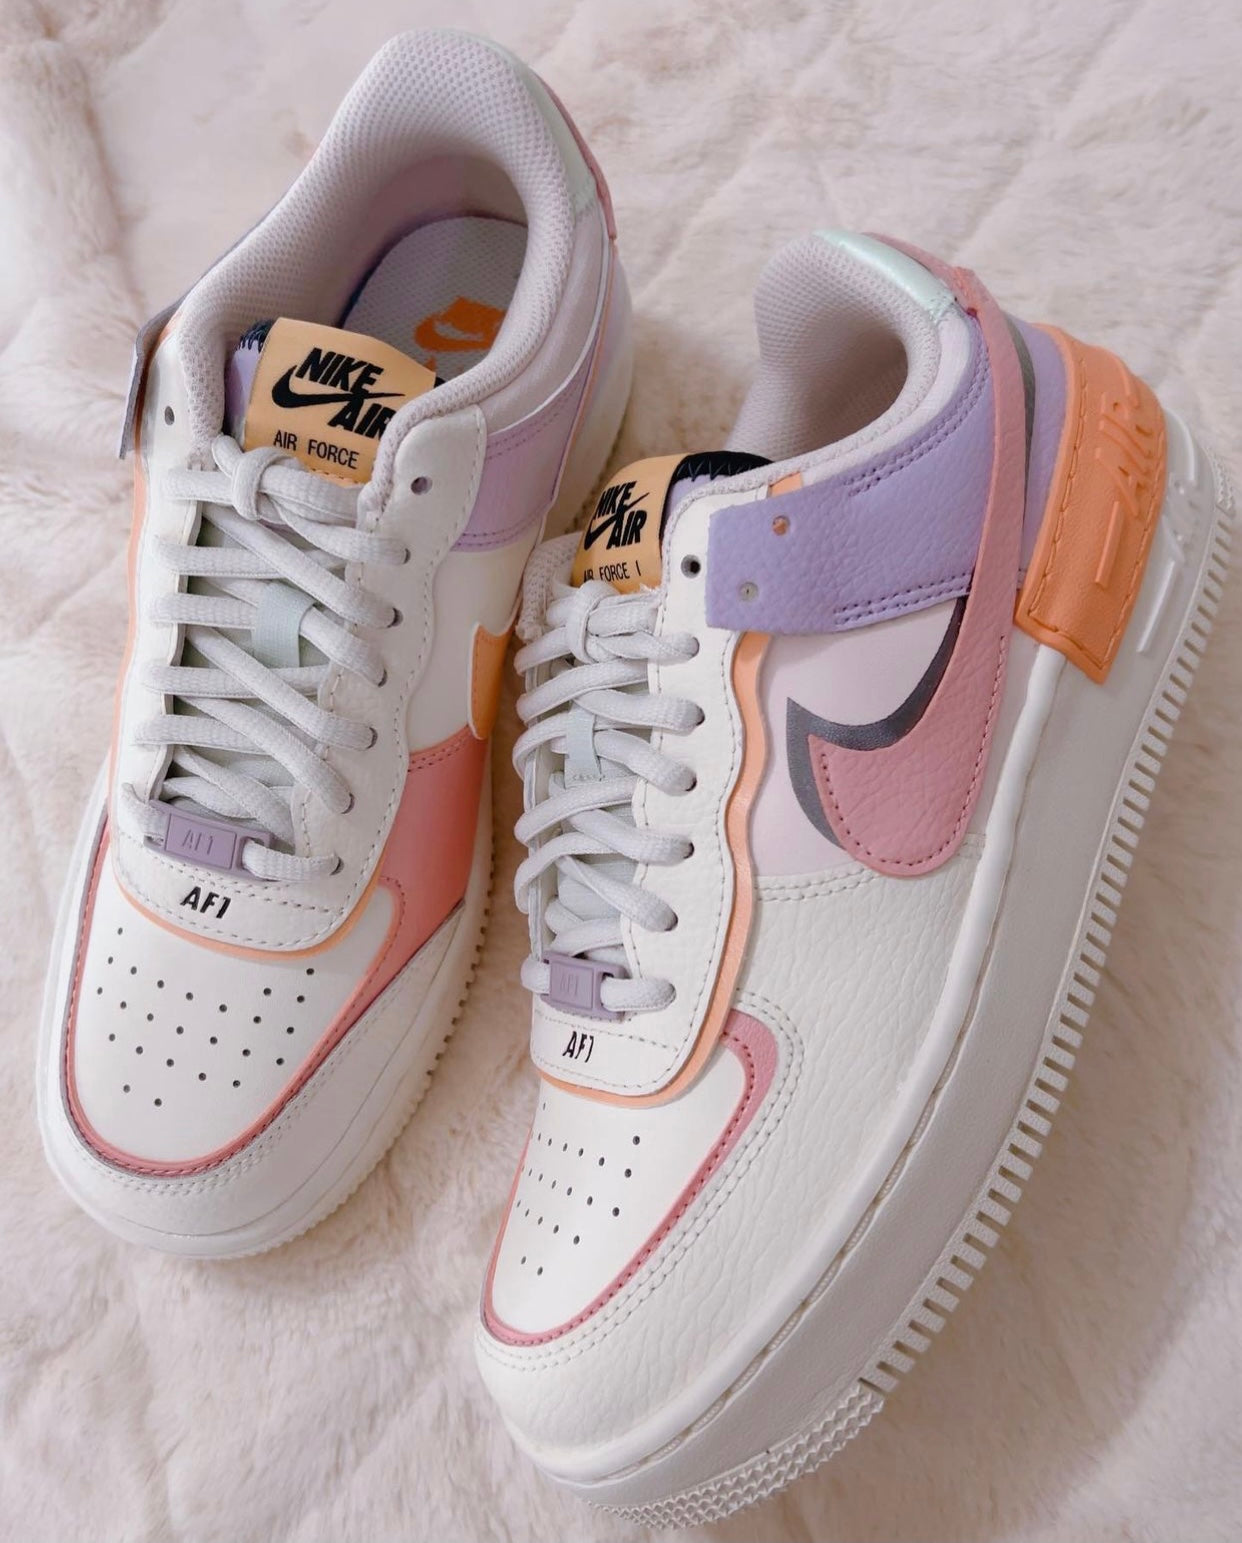 Nike Air Force 1 Shadow Women’s Sneakers Sail/Pink Glaze, Size 8